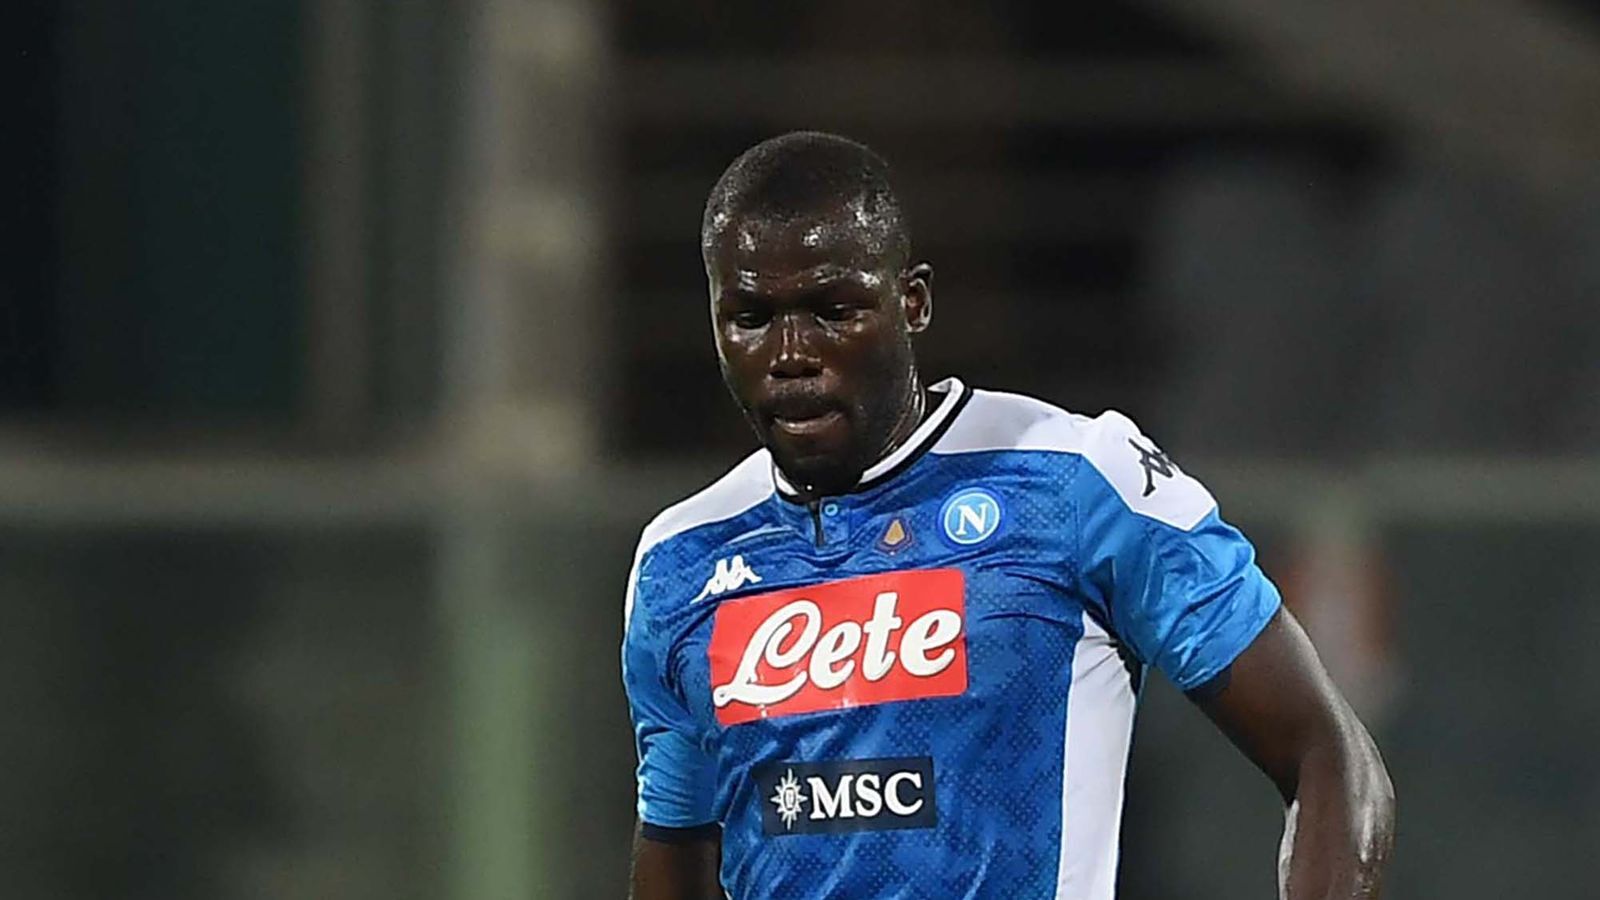 Napoli Firm on Selling Koulibaly for a High Price